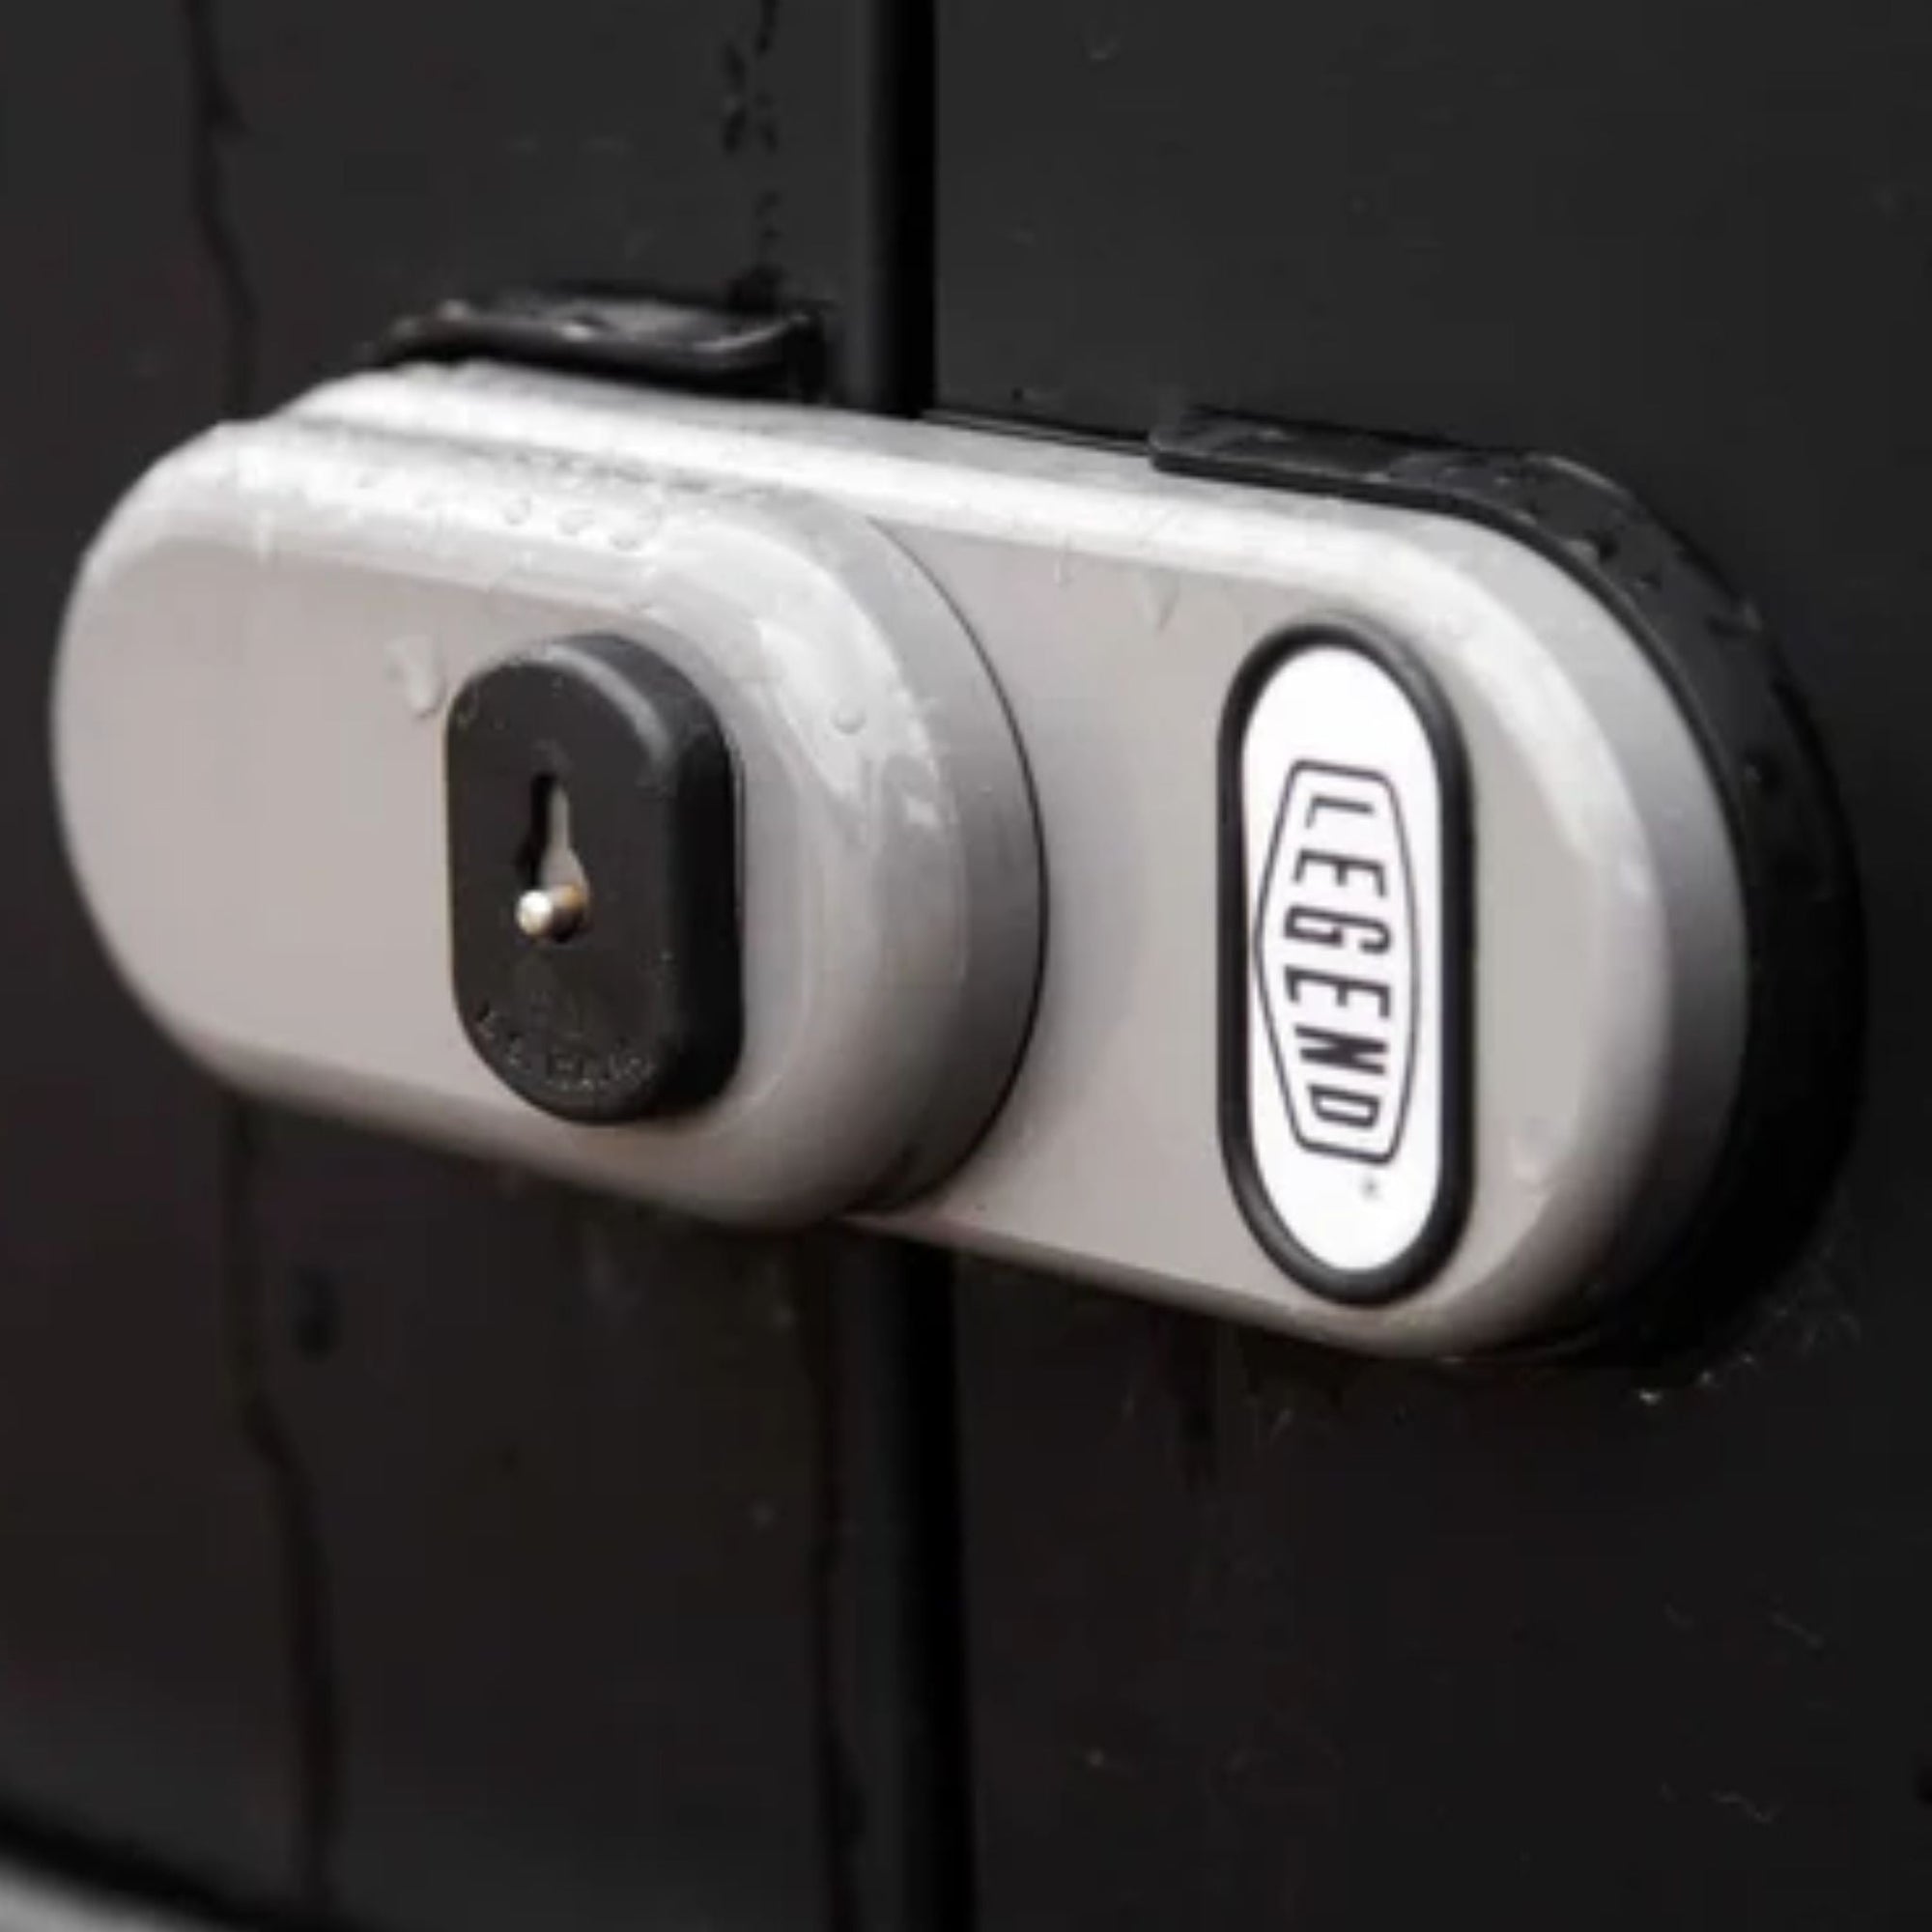 The SecuriLock Van Door Slam Lock That Actually Prevents Cargo Theft in Vans in High Crime Urban Areas and Vocations Holding Expensive Tools, Equipment and Cargos - The Lock Source